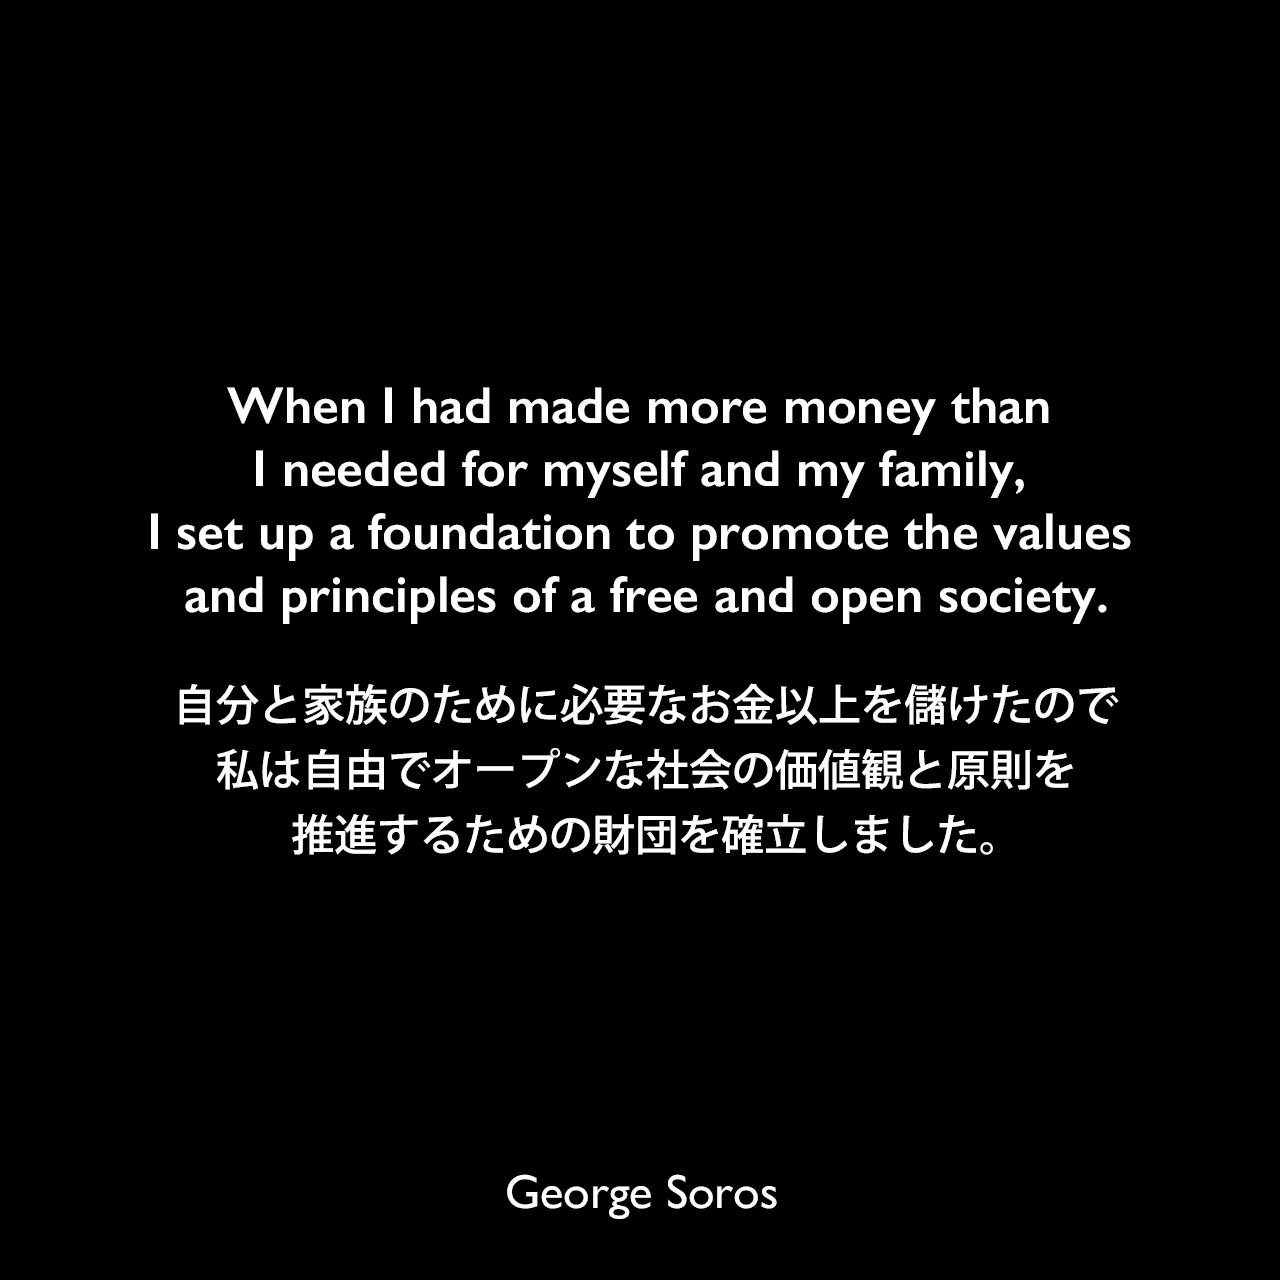 When I had made more money than I needed for myself and my family, I set up a foundation to promote the values and principles of a free and open society.自分と家族のために必要なお金以上を儲けたので、私は自由でオープンな社会の価値観と原則を推進するための財団を確立しました。George Soros